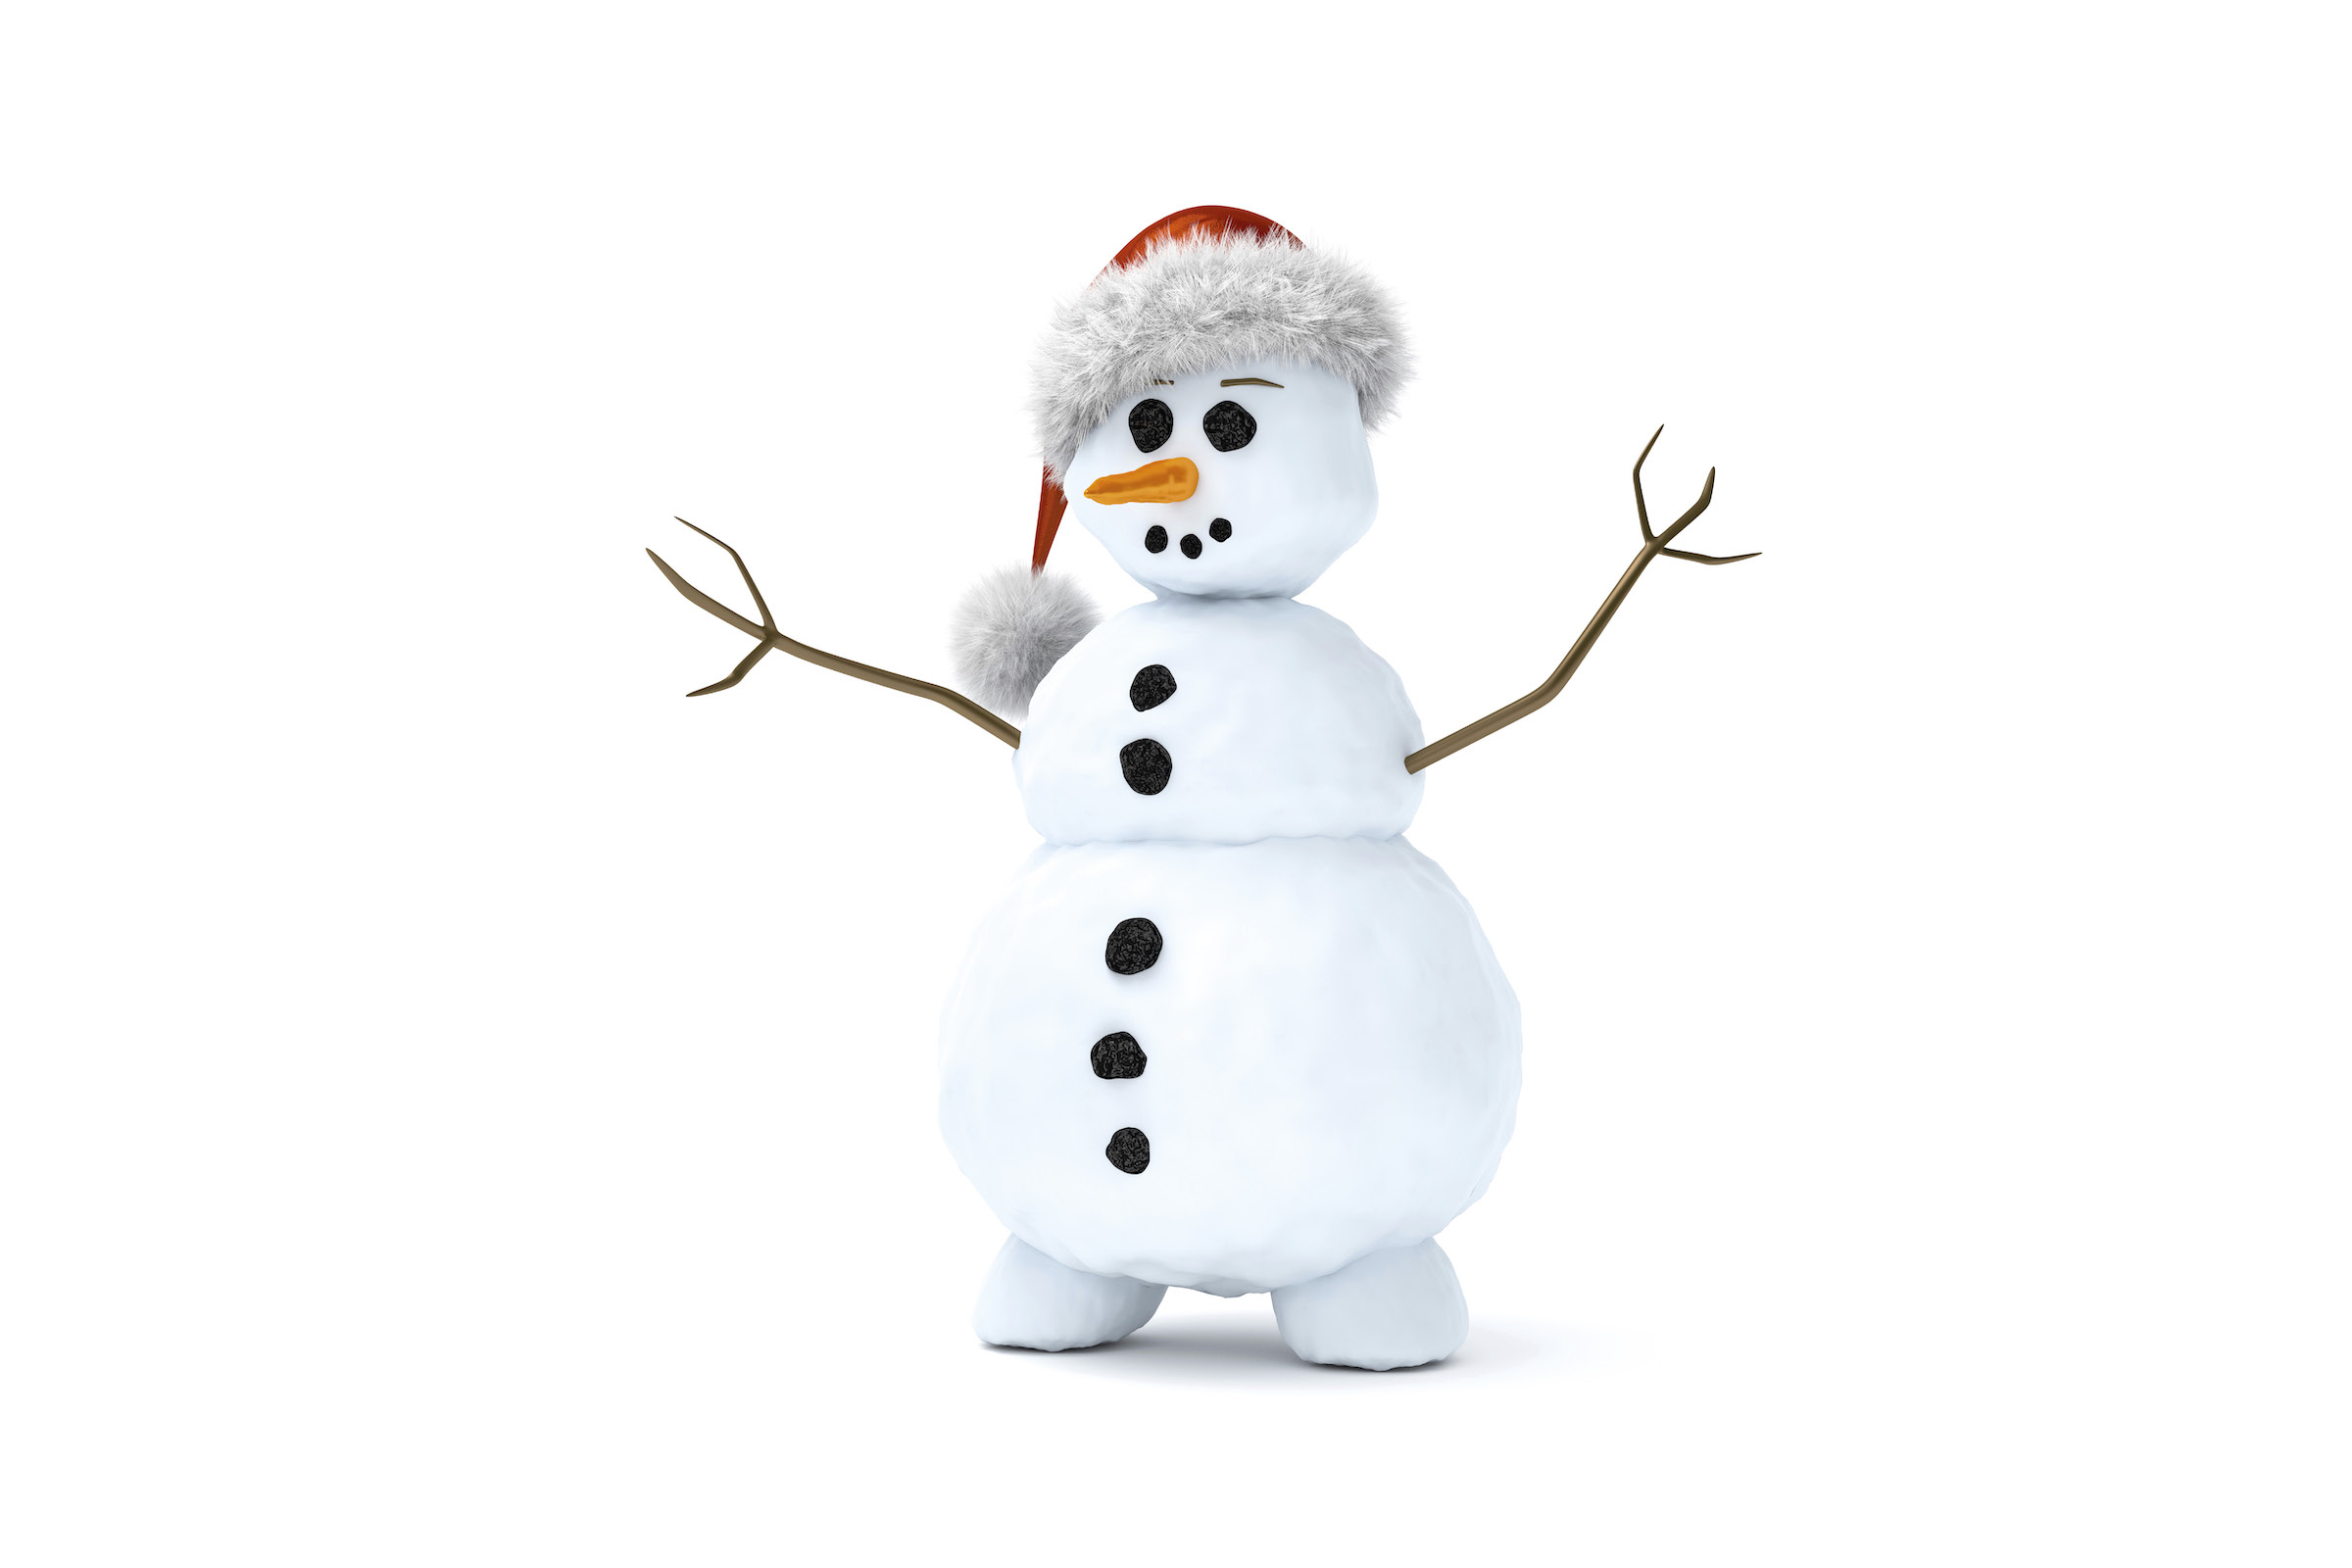 How to build the ultimate snowman, according to science - BBC ...